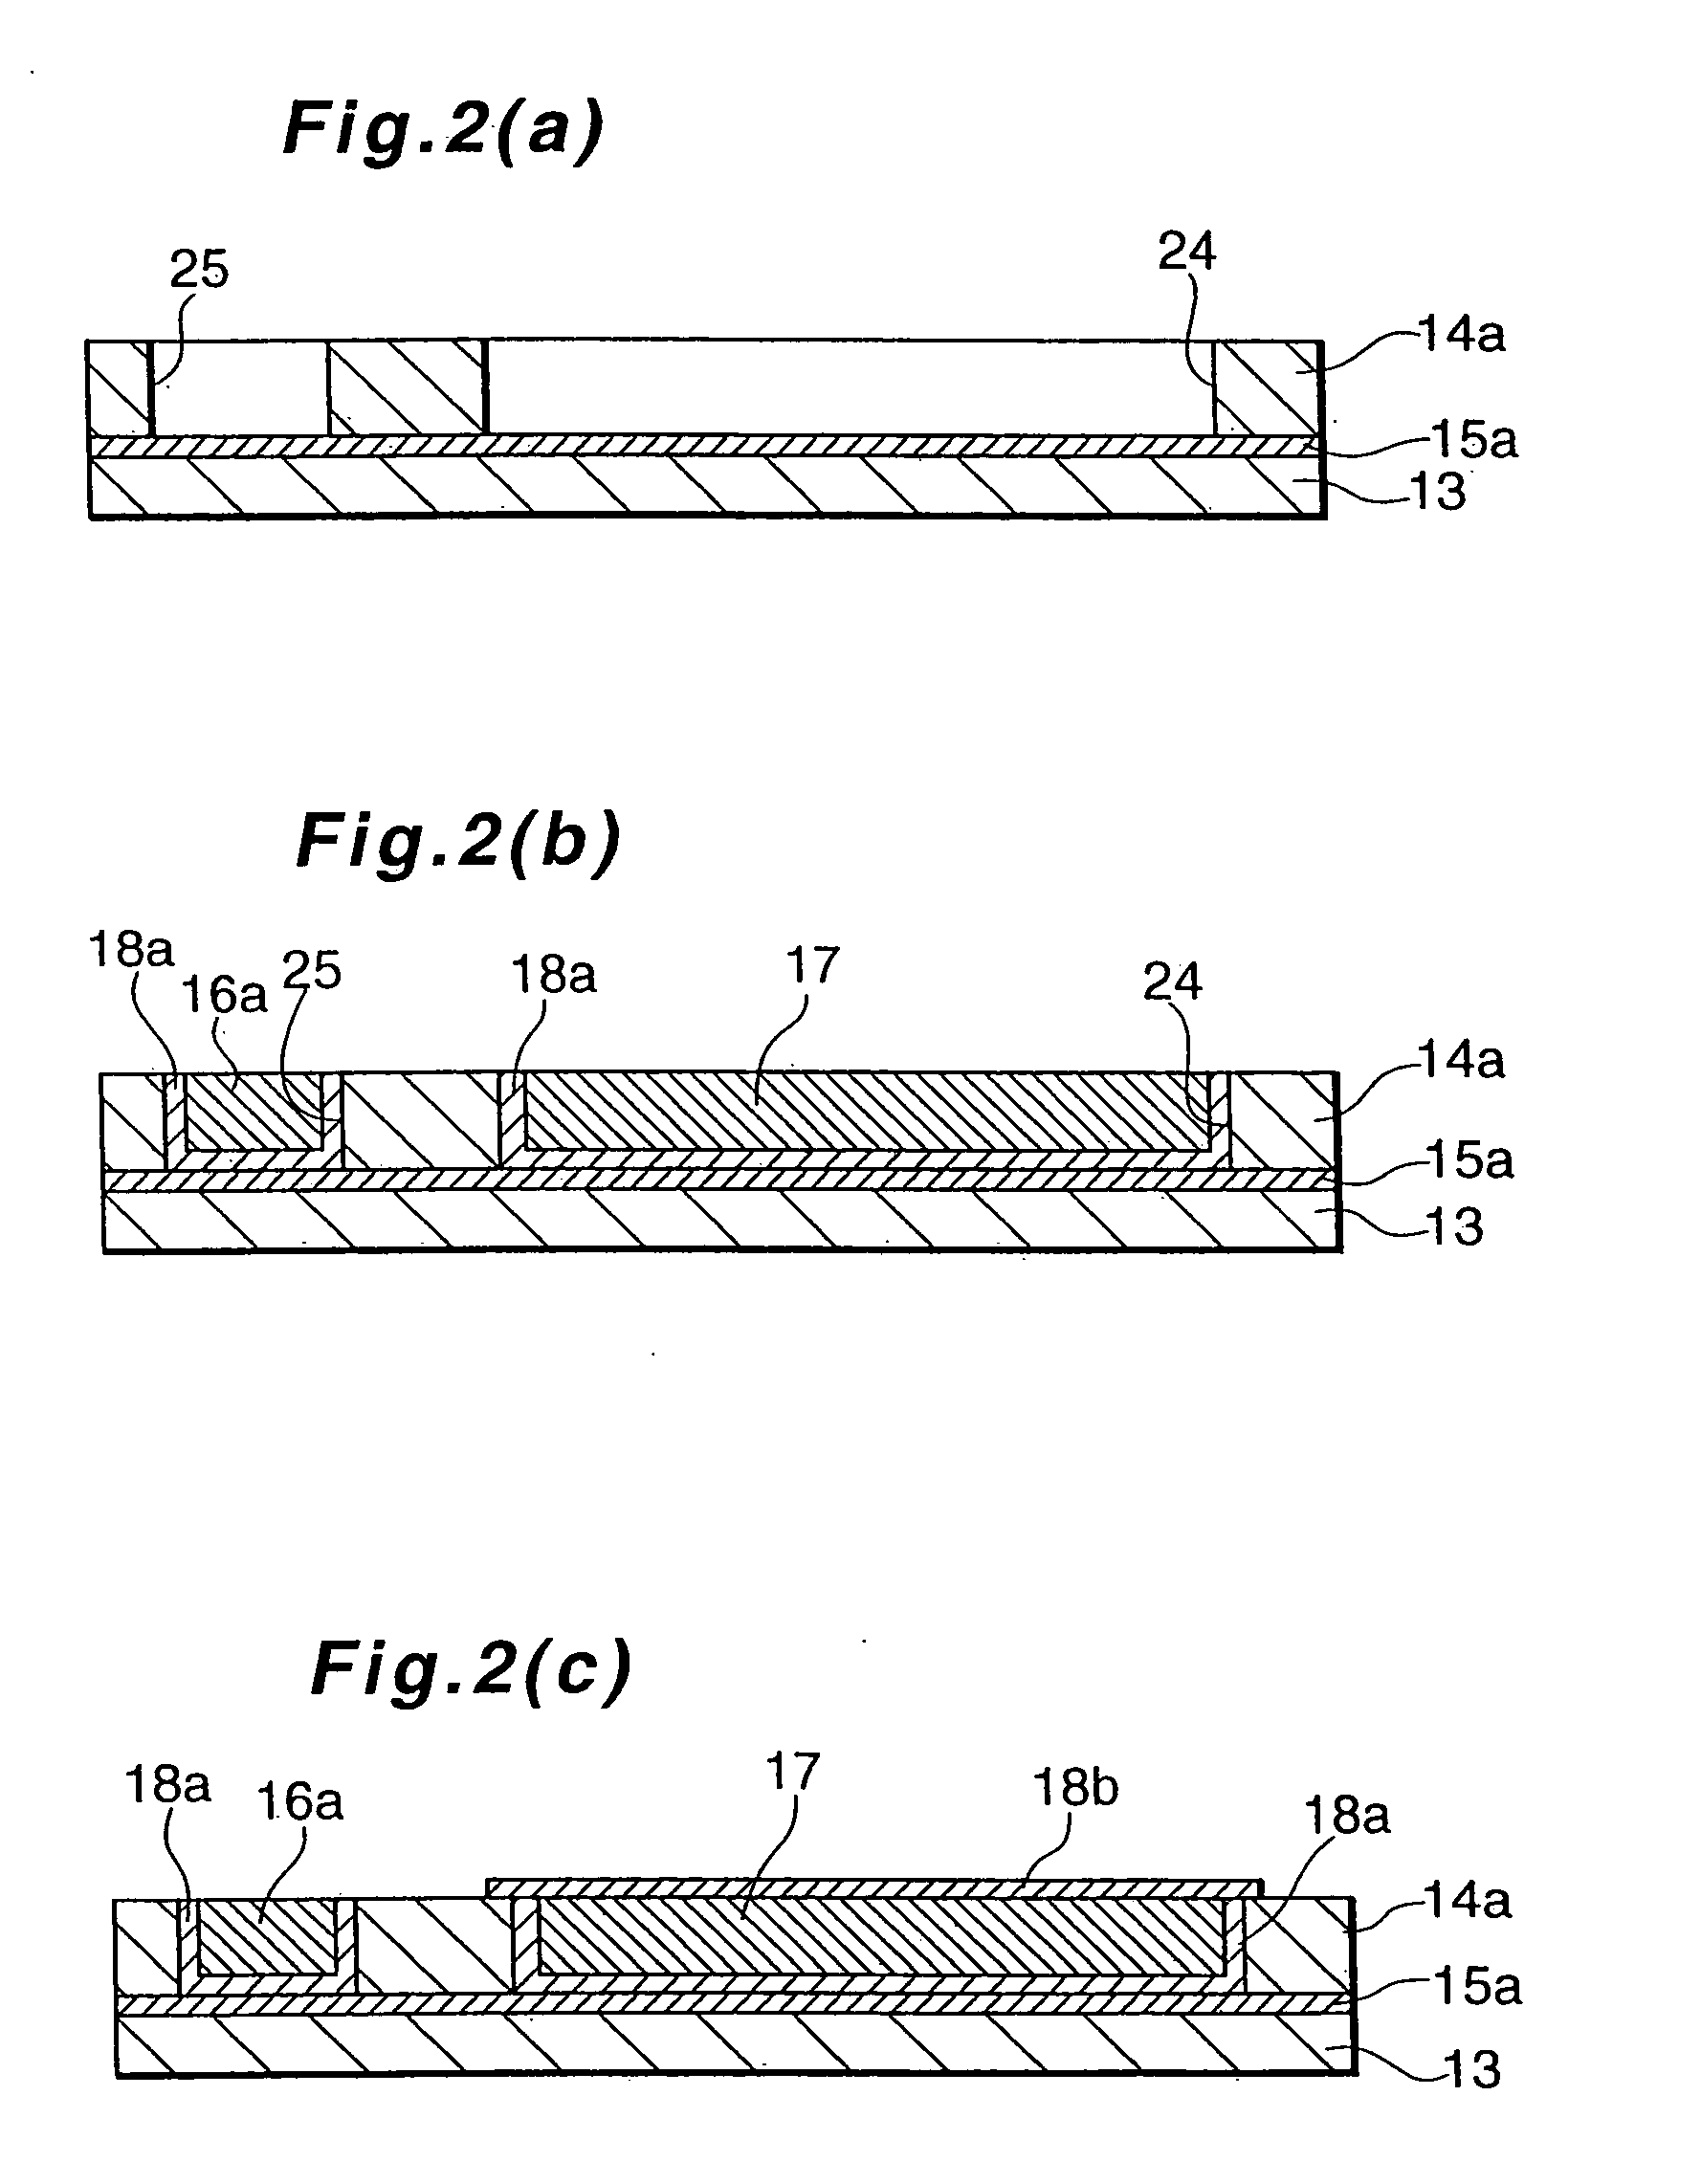 Method of manufacturing a capacitor with copper electrodes and diffusion barriers